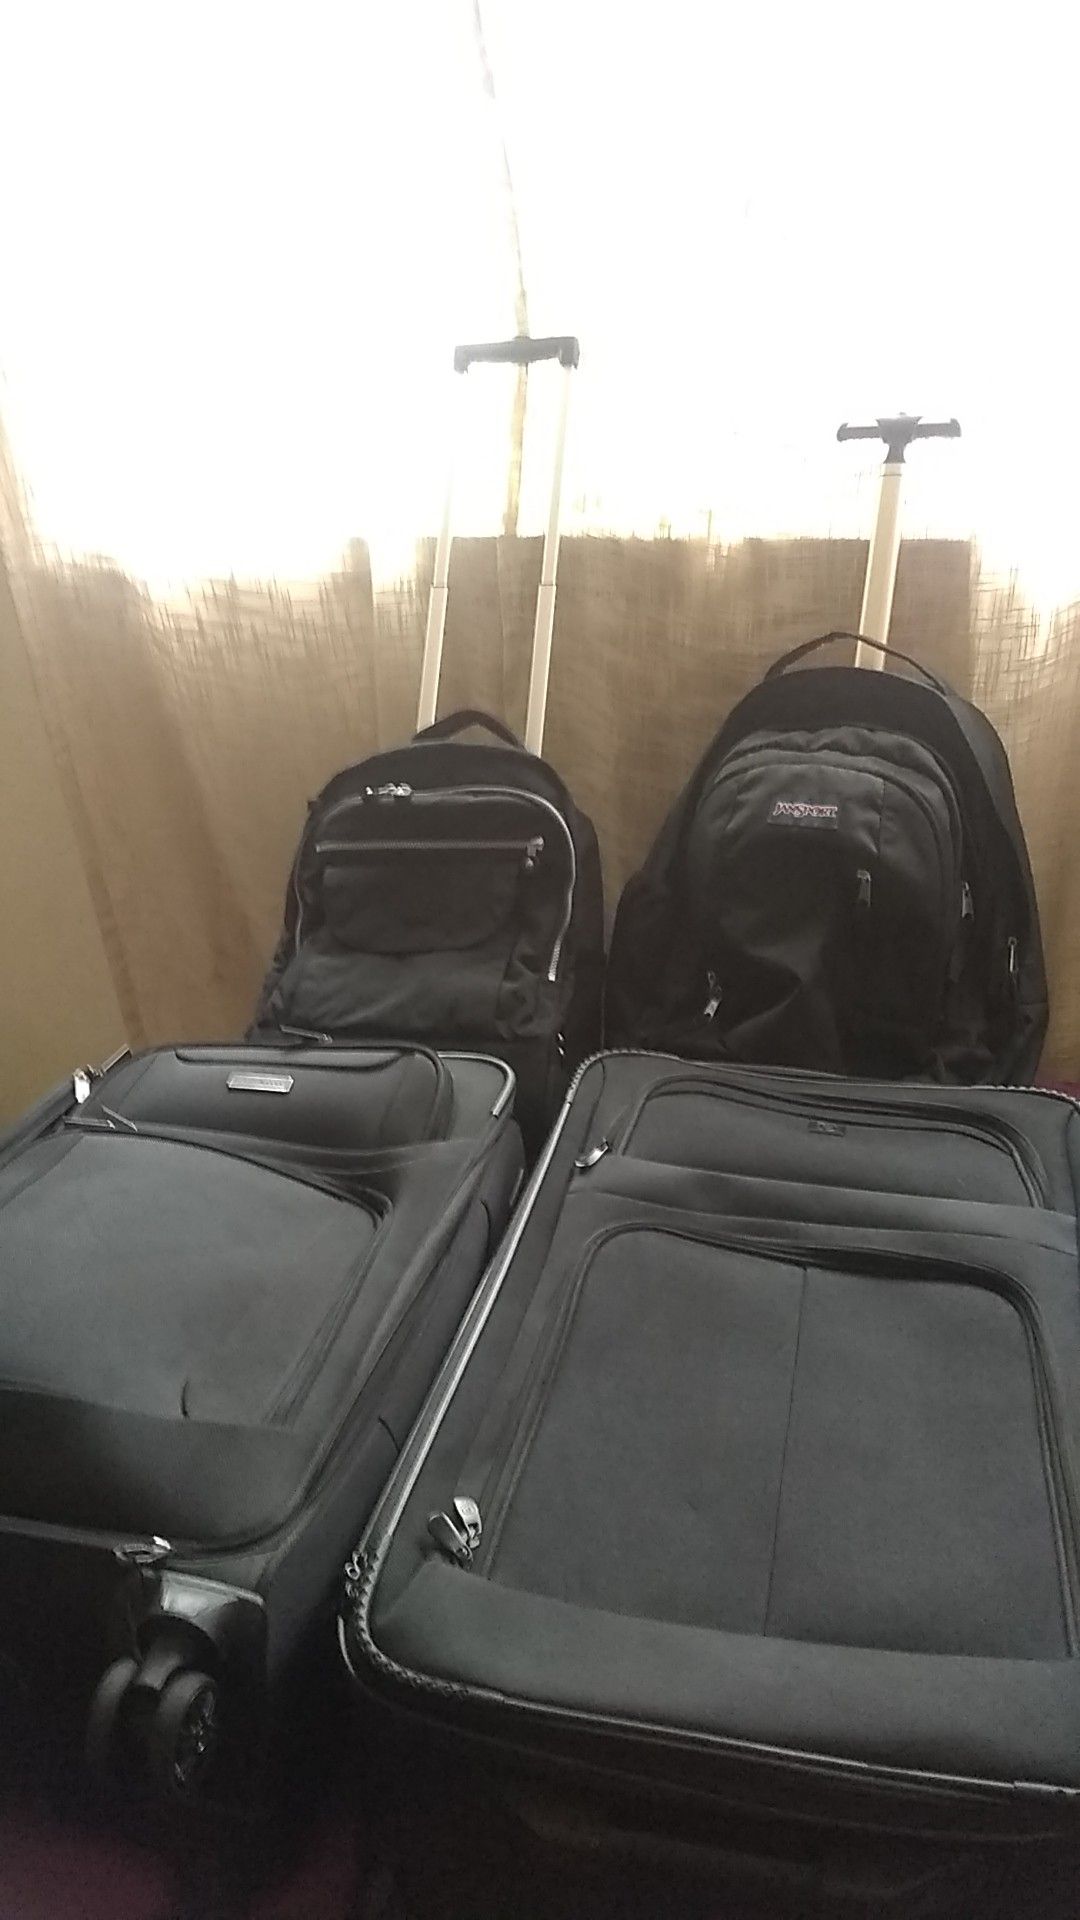 Two suitcases and 2 carrying bags